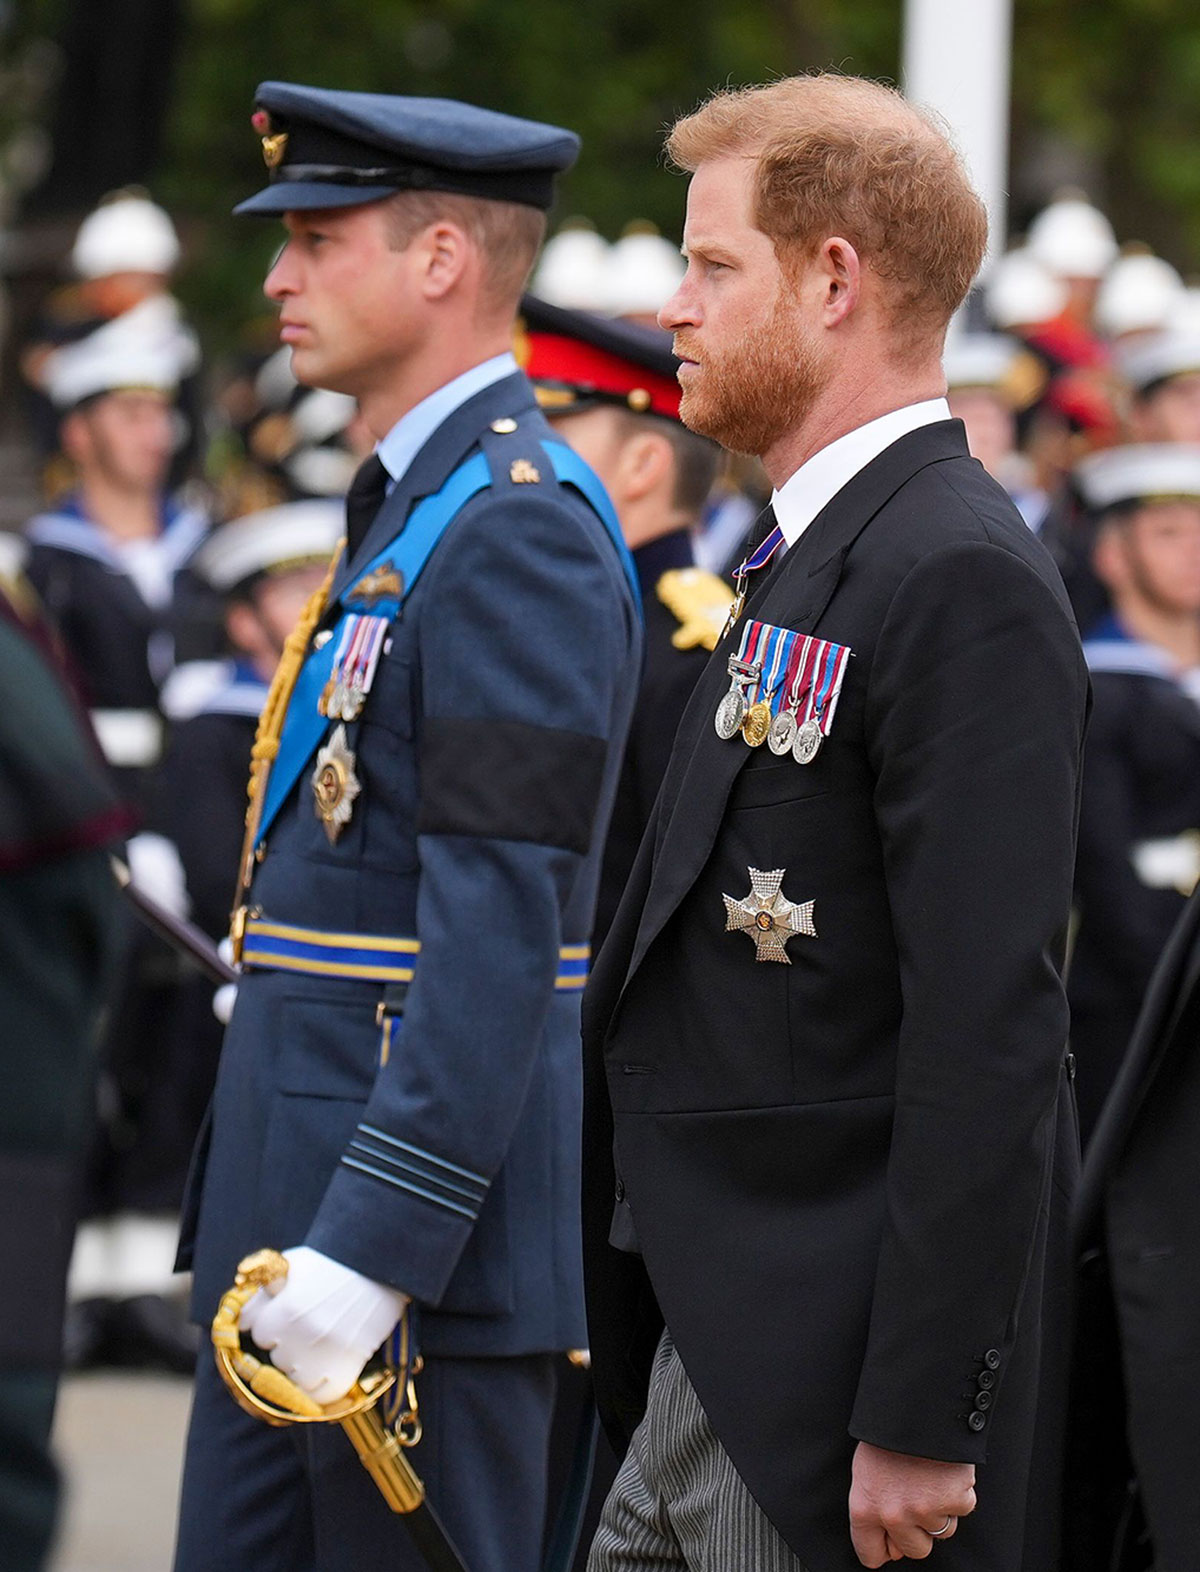 Feature Prince Harry Does Not Wear Military Uniform to Queen Elizabeth II's Funeral Despite Decade of Service